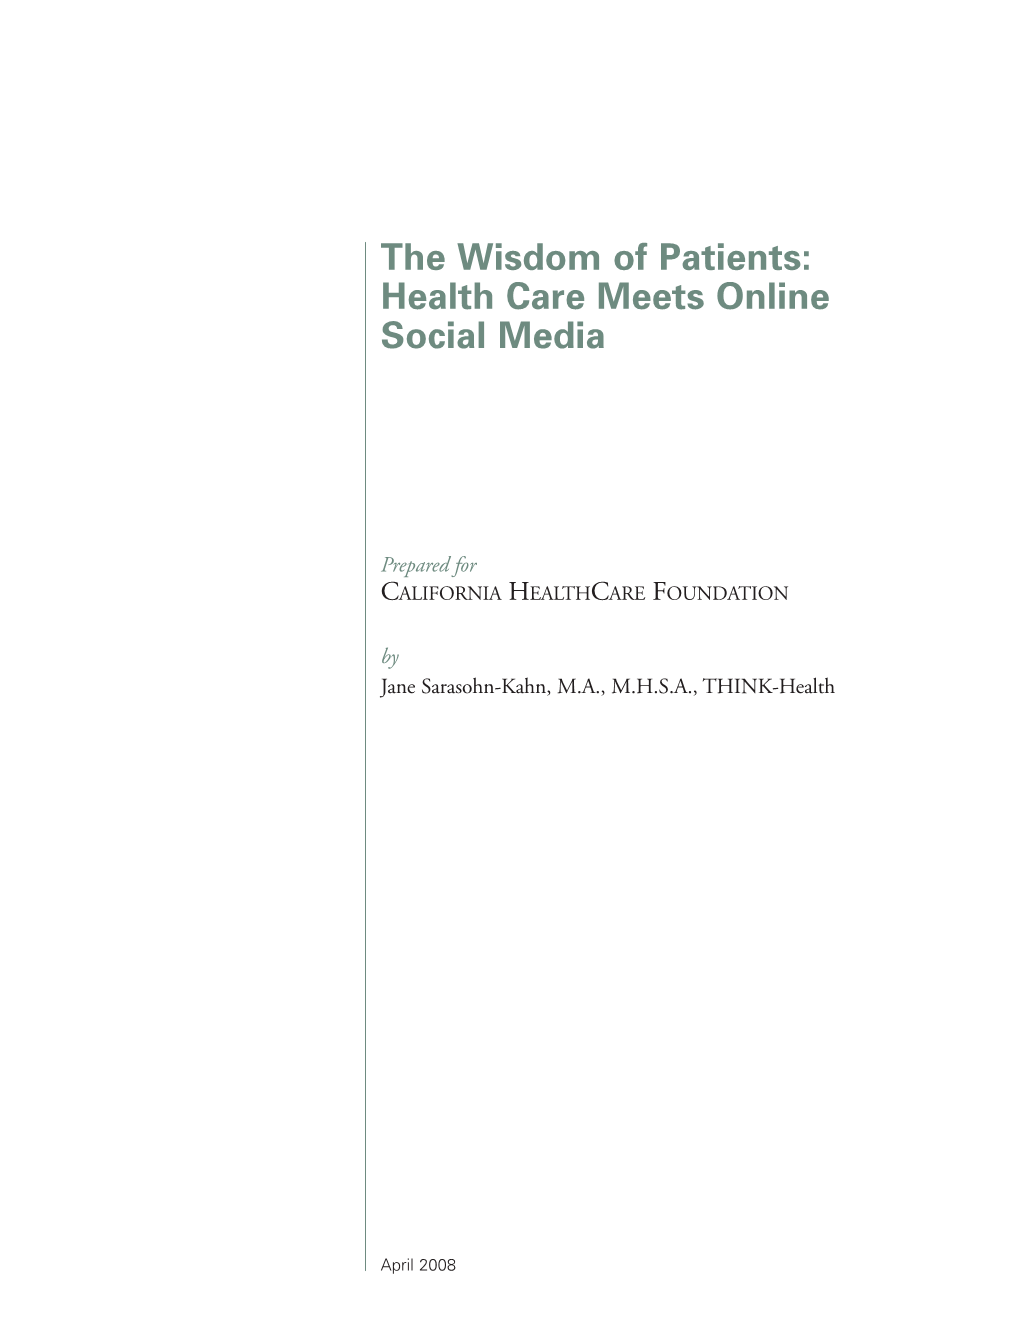 The Wisdom of Patients: Health Care Meets Online Social Media